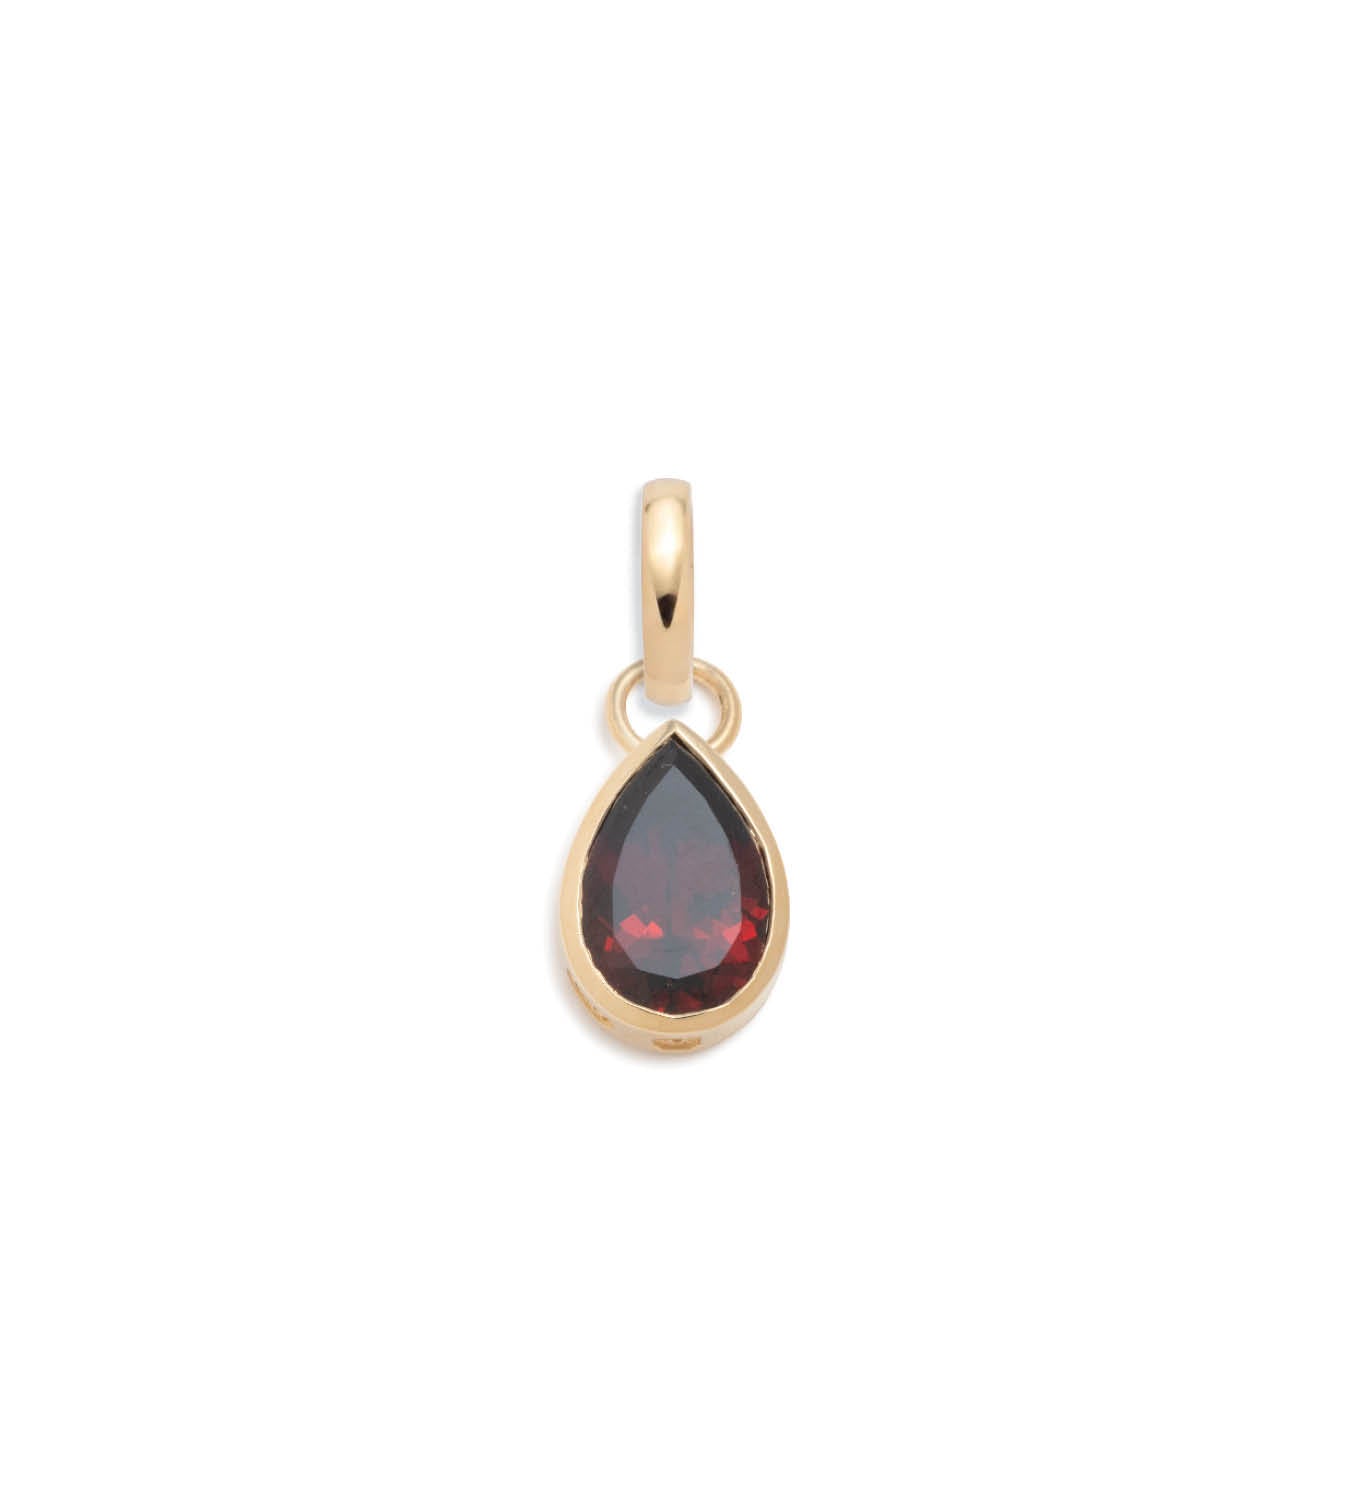 Forever & Always a Pair - Love : 6.3ct Garnet Pear Pendant with Oval Pushgate